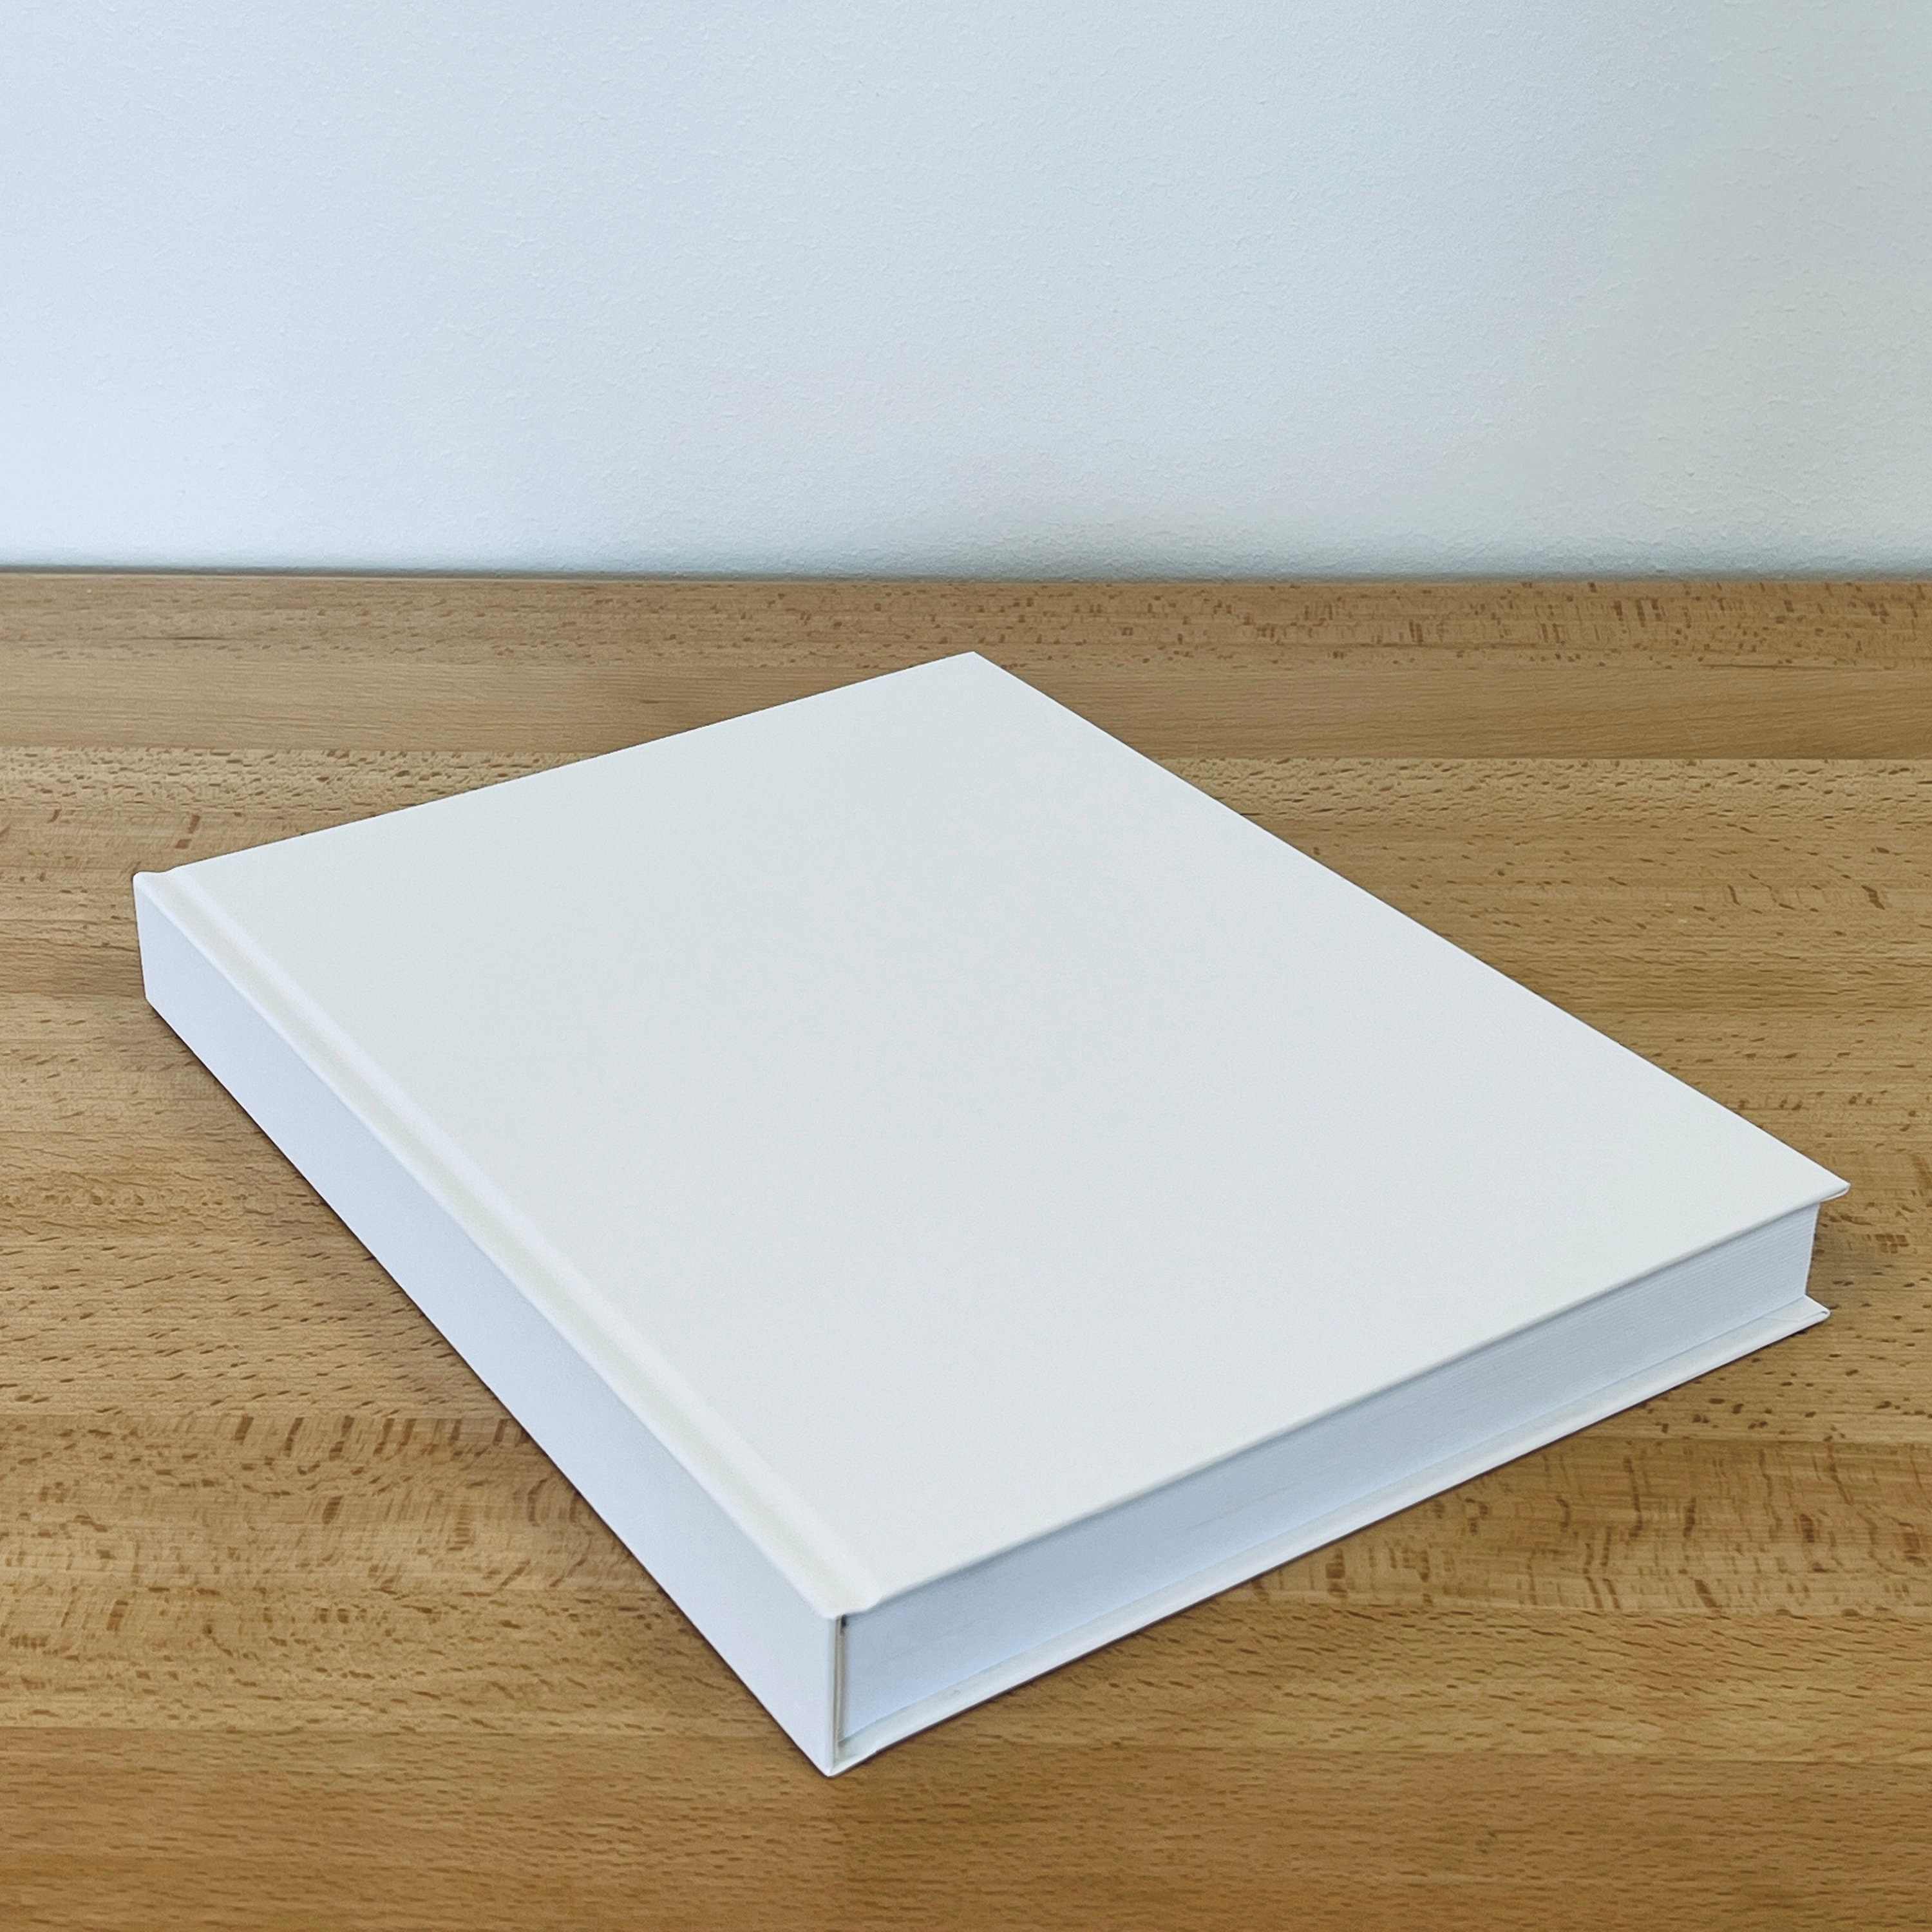 Blank Books (Pack of 12) - 6 W x 8 H Hardcover with Unlined White Pages